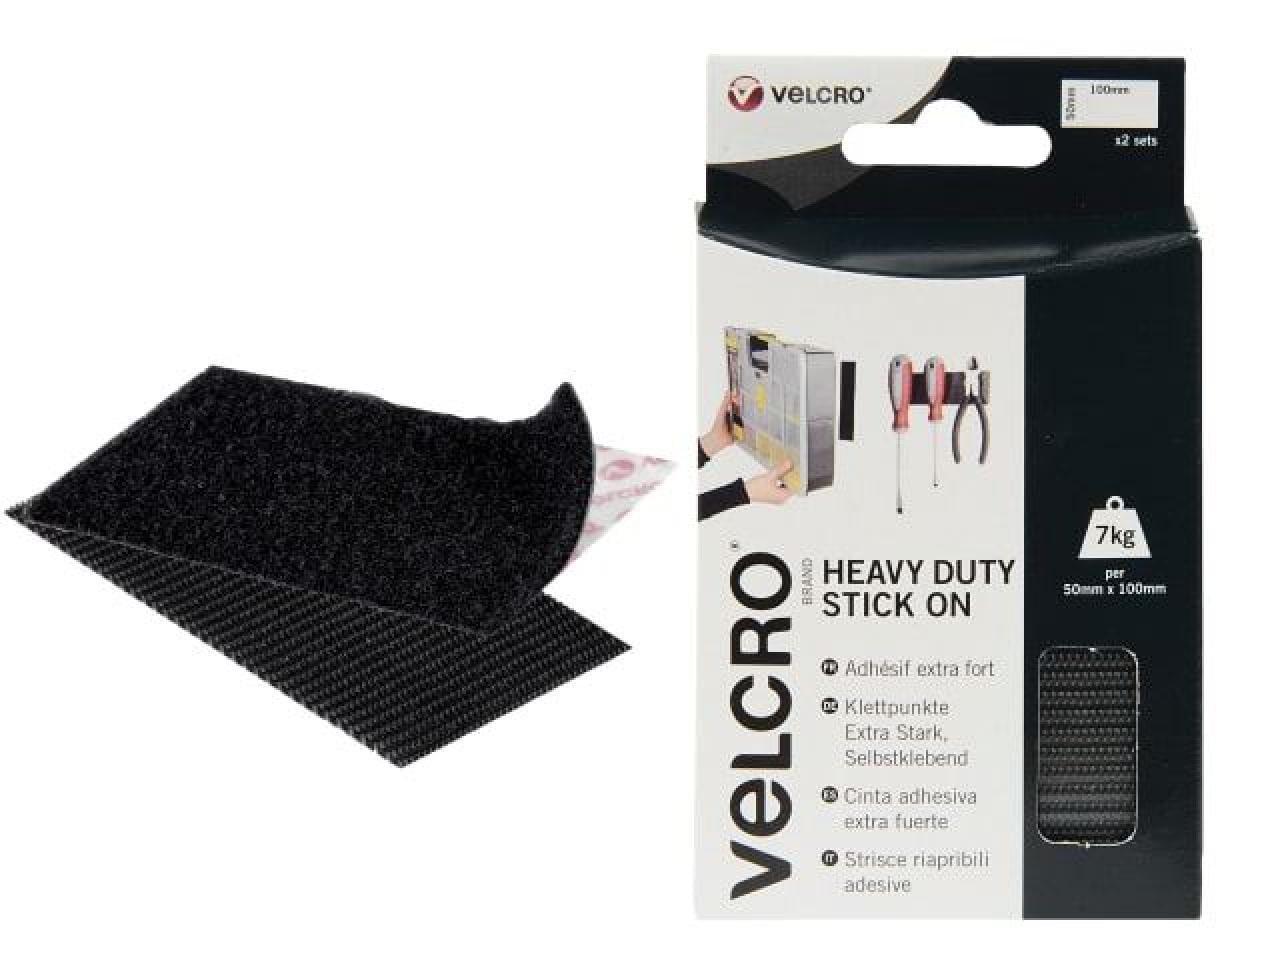 VELCRO® Brand Heavy Duty Stick On Strips-Black OR White-50mm x 100mm-Only £3.95 